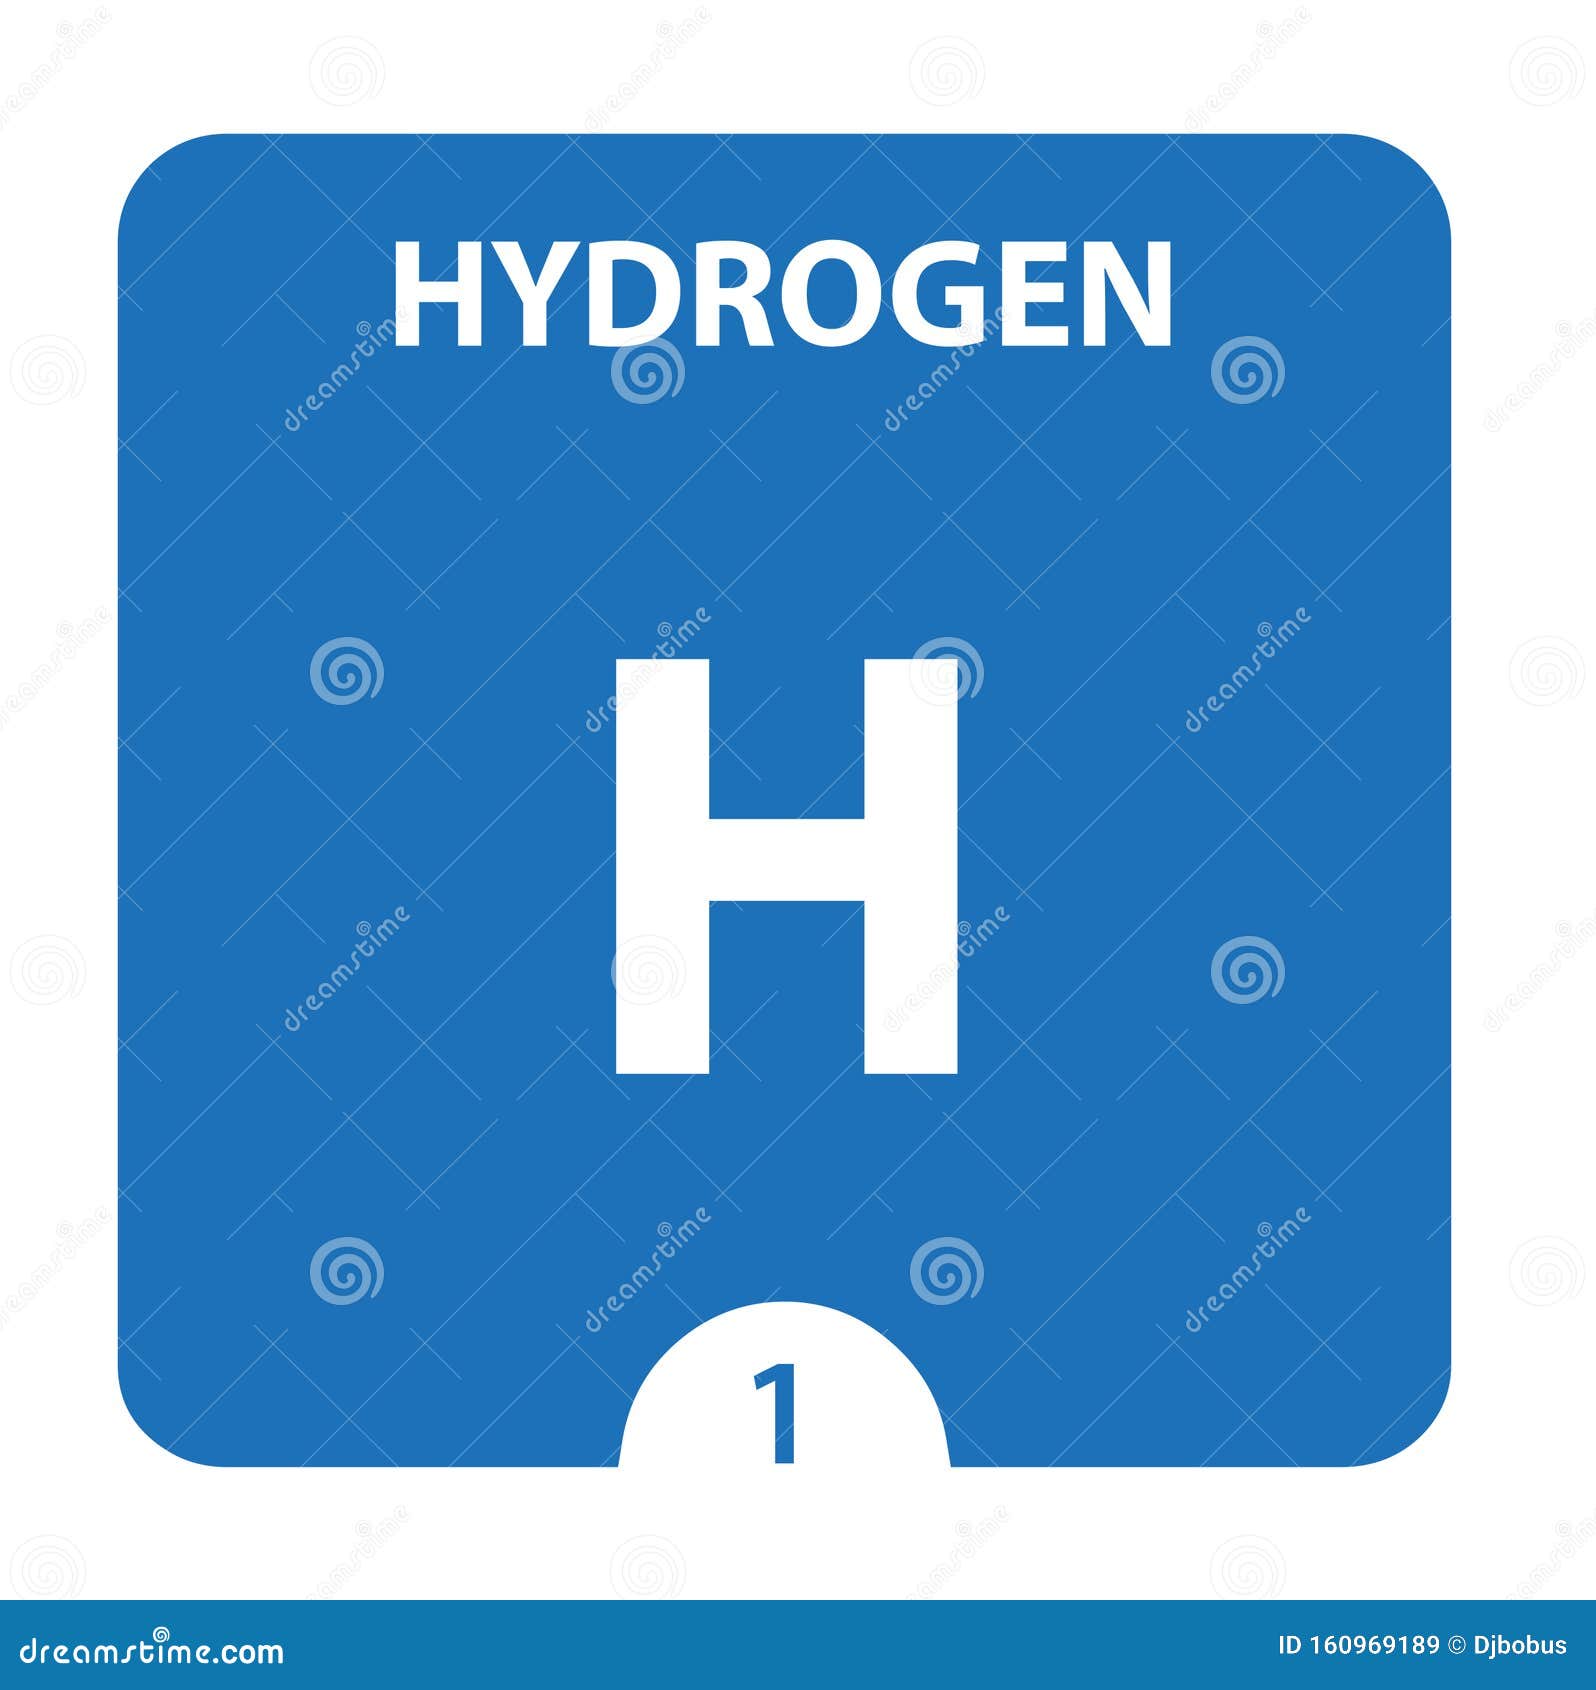 Hydrogen Chemical 1 Element Of Periodic Table Molecule And Communication Background Hydrogen Chemical H